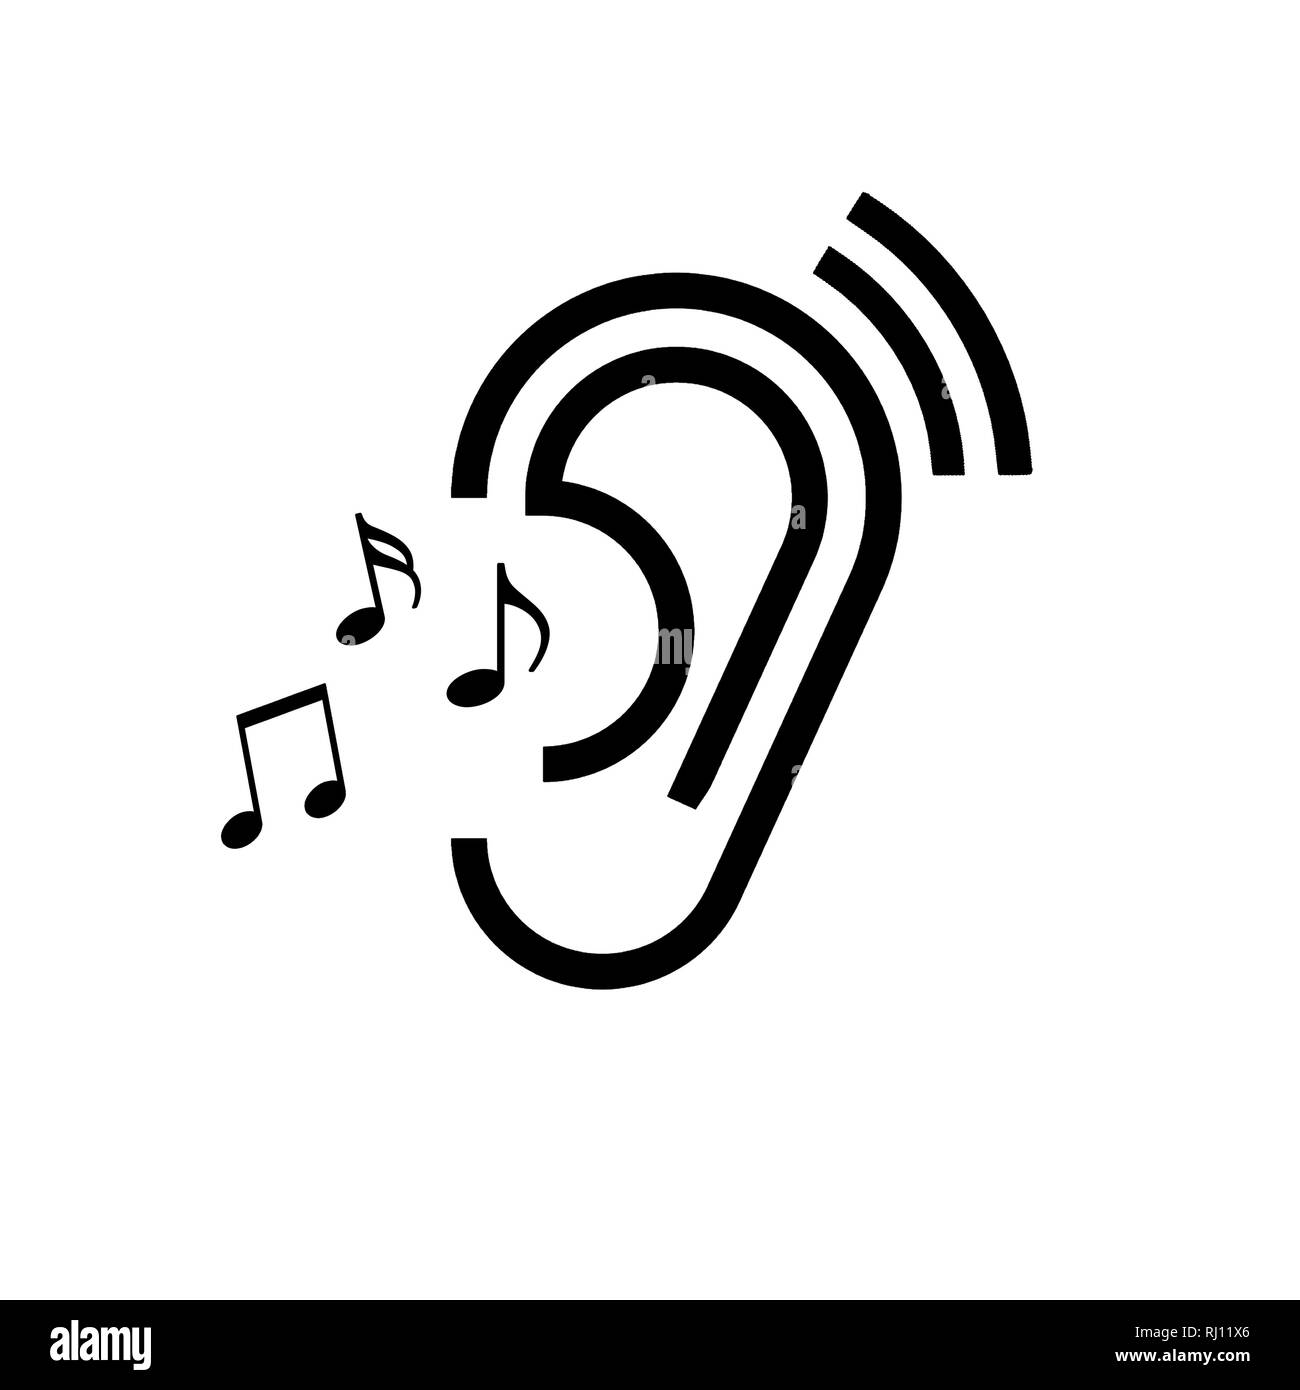 icon human ear listening to music black isolated on white background Stock Photo